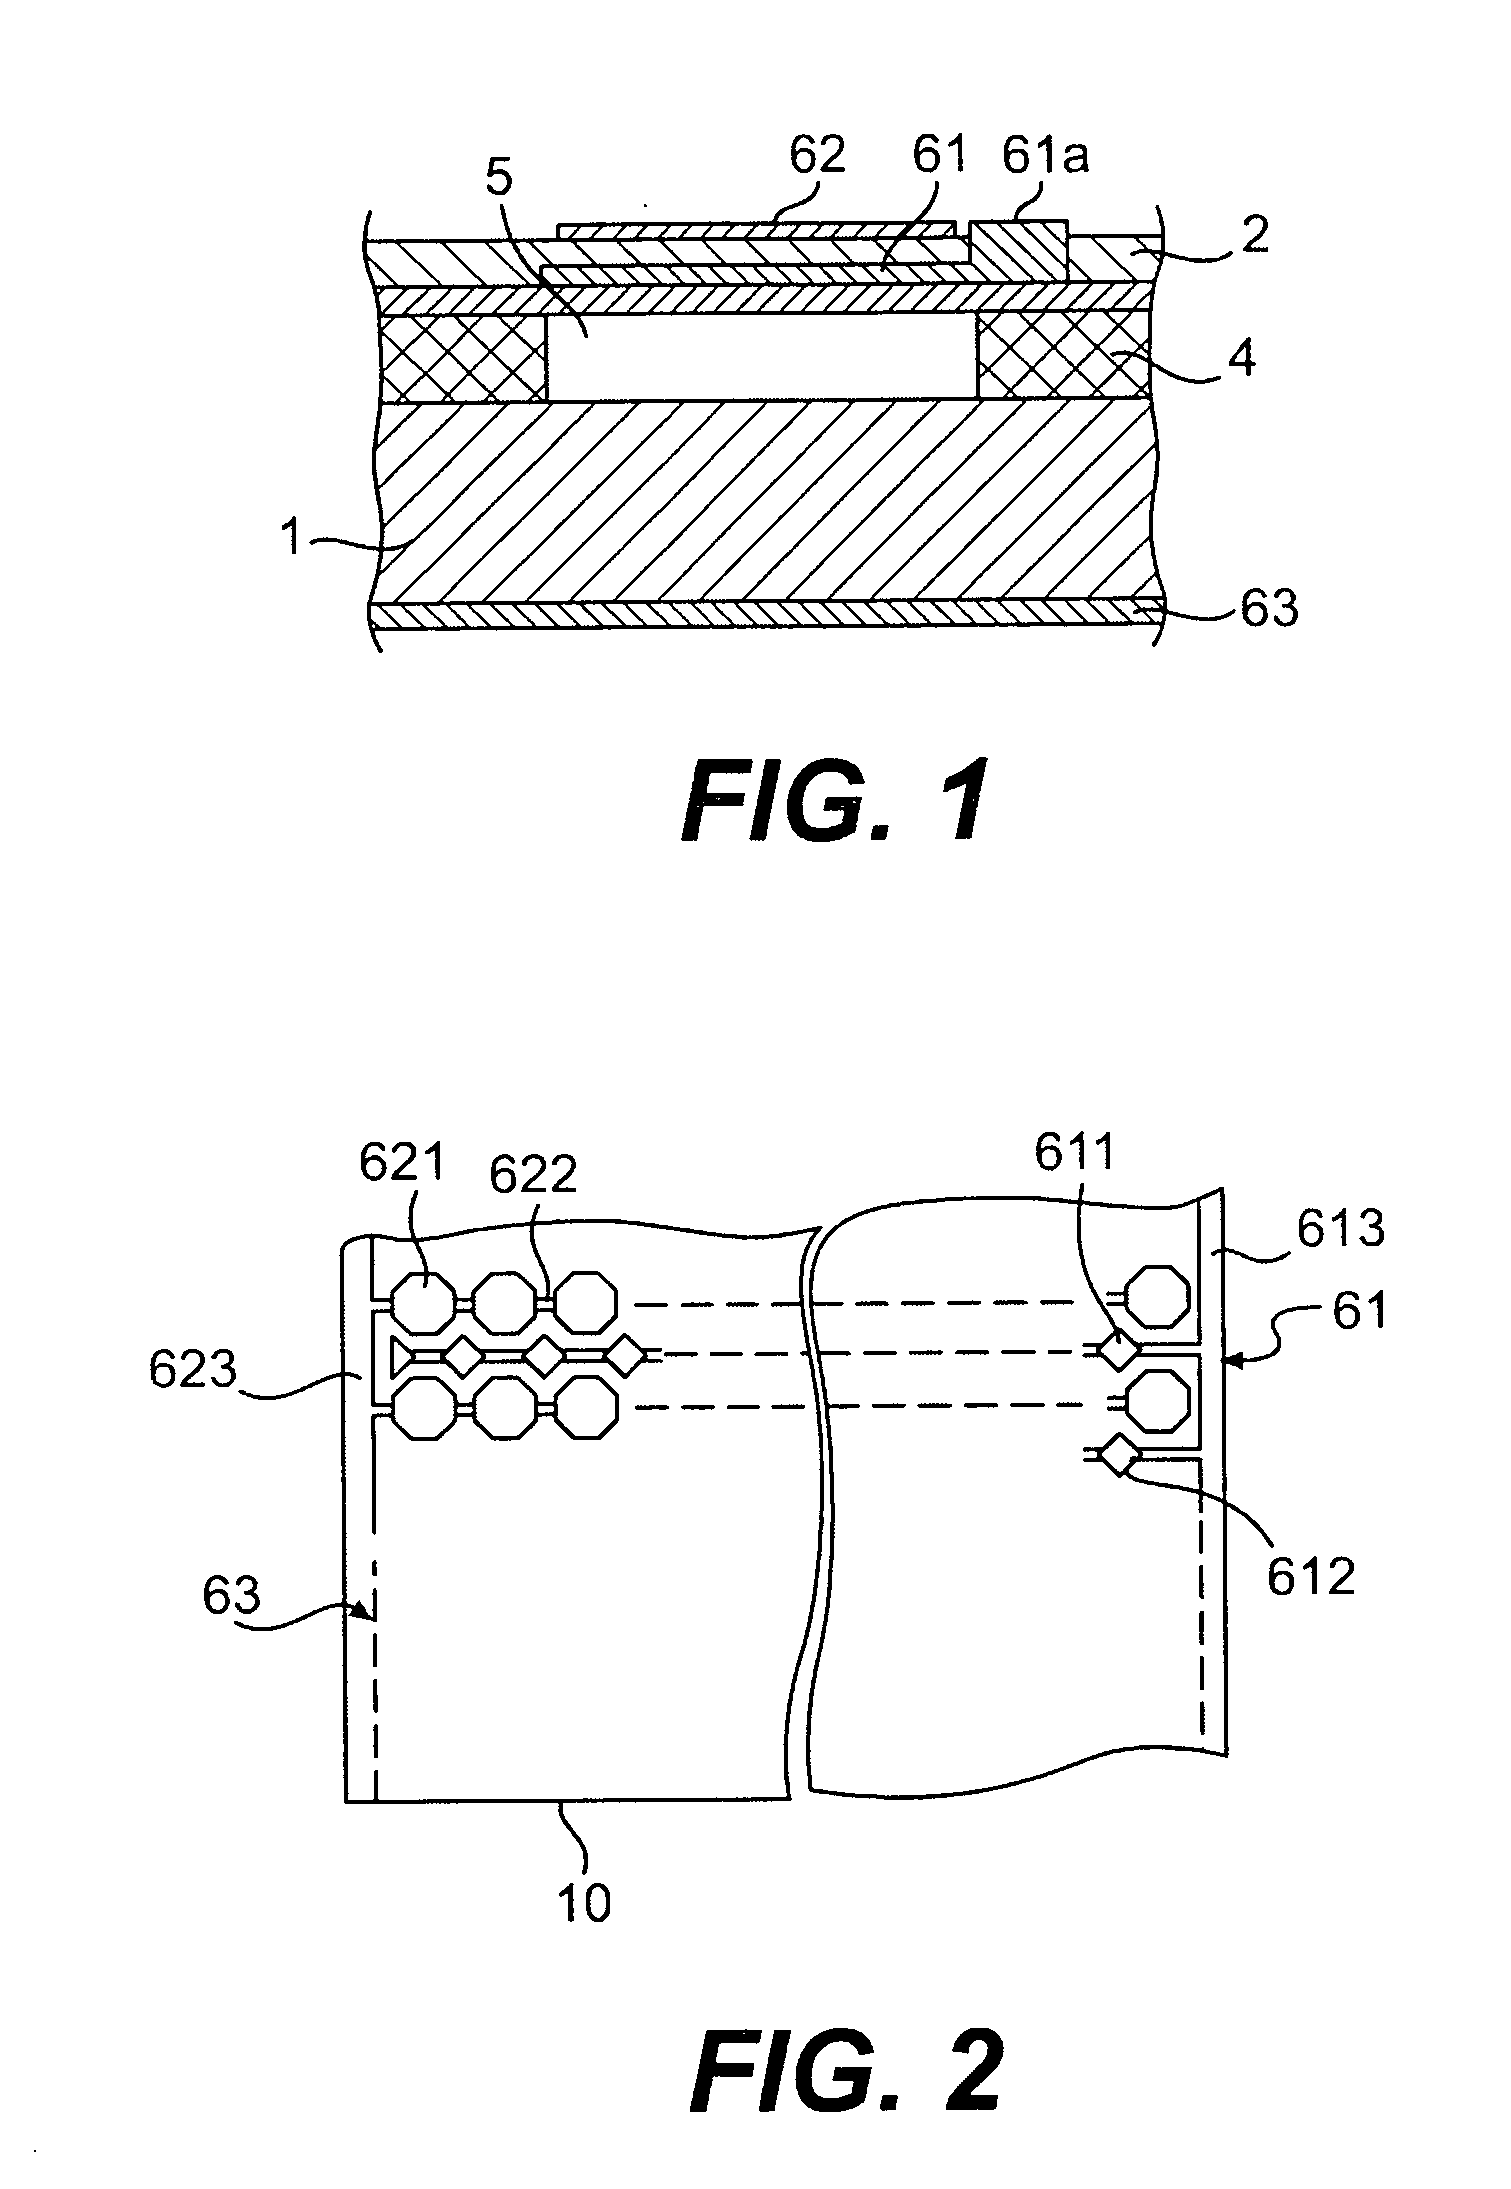 Electrostatic membranes for sensors, ultrasonic transducers incorporating such membranes, and manufacturing methods therefor